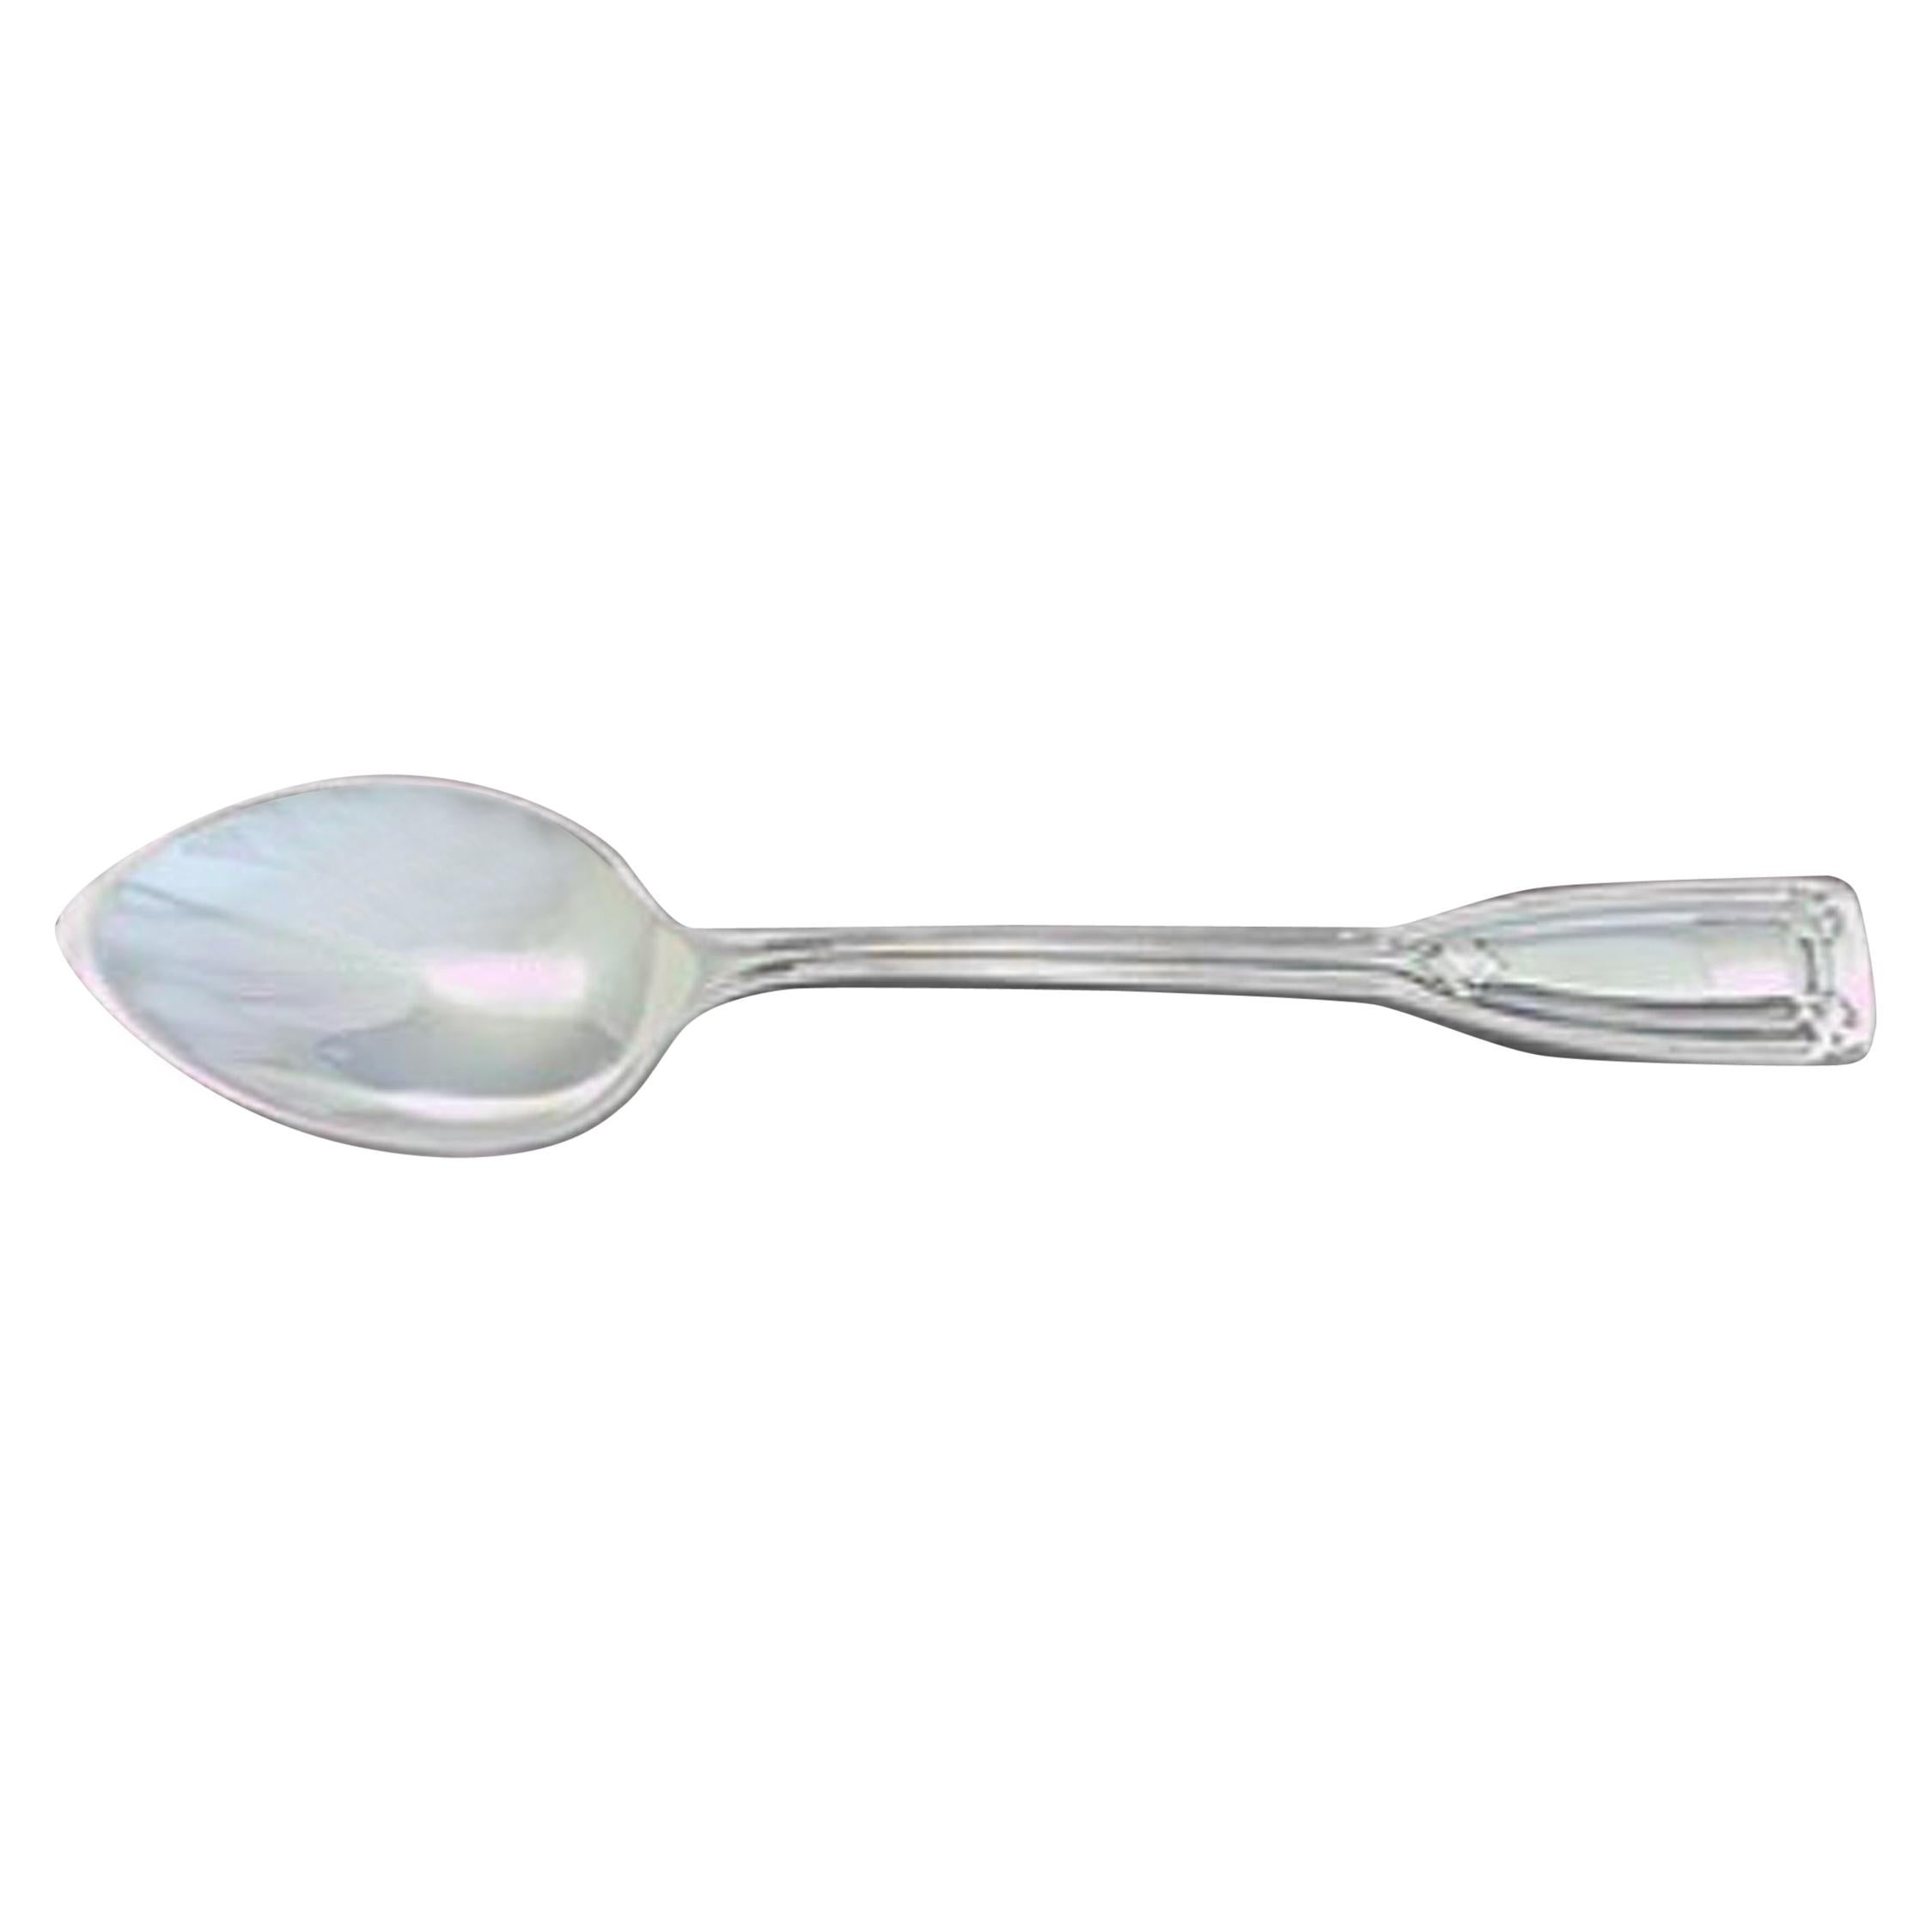 Co sterling patd 1902 1/2 inches sterling salt spoons art noveau I.S 